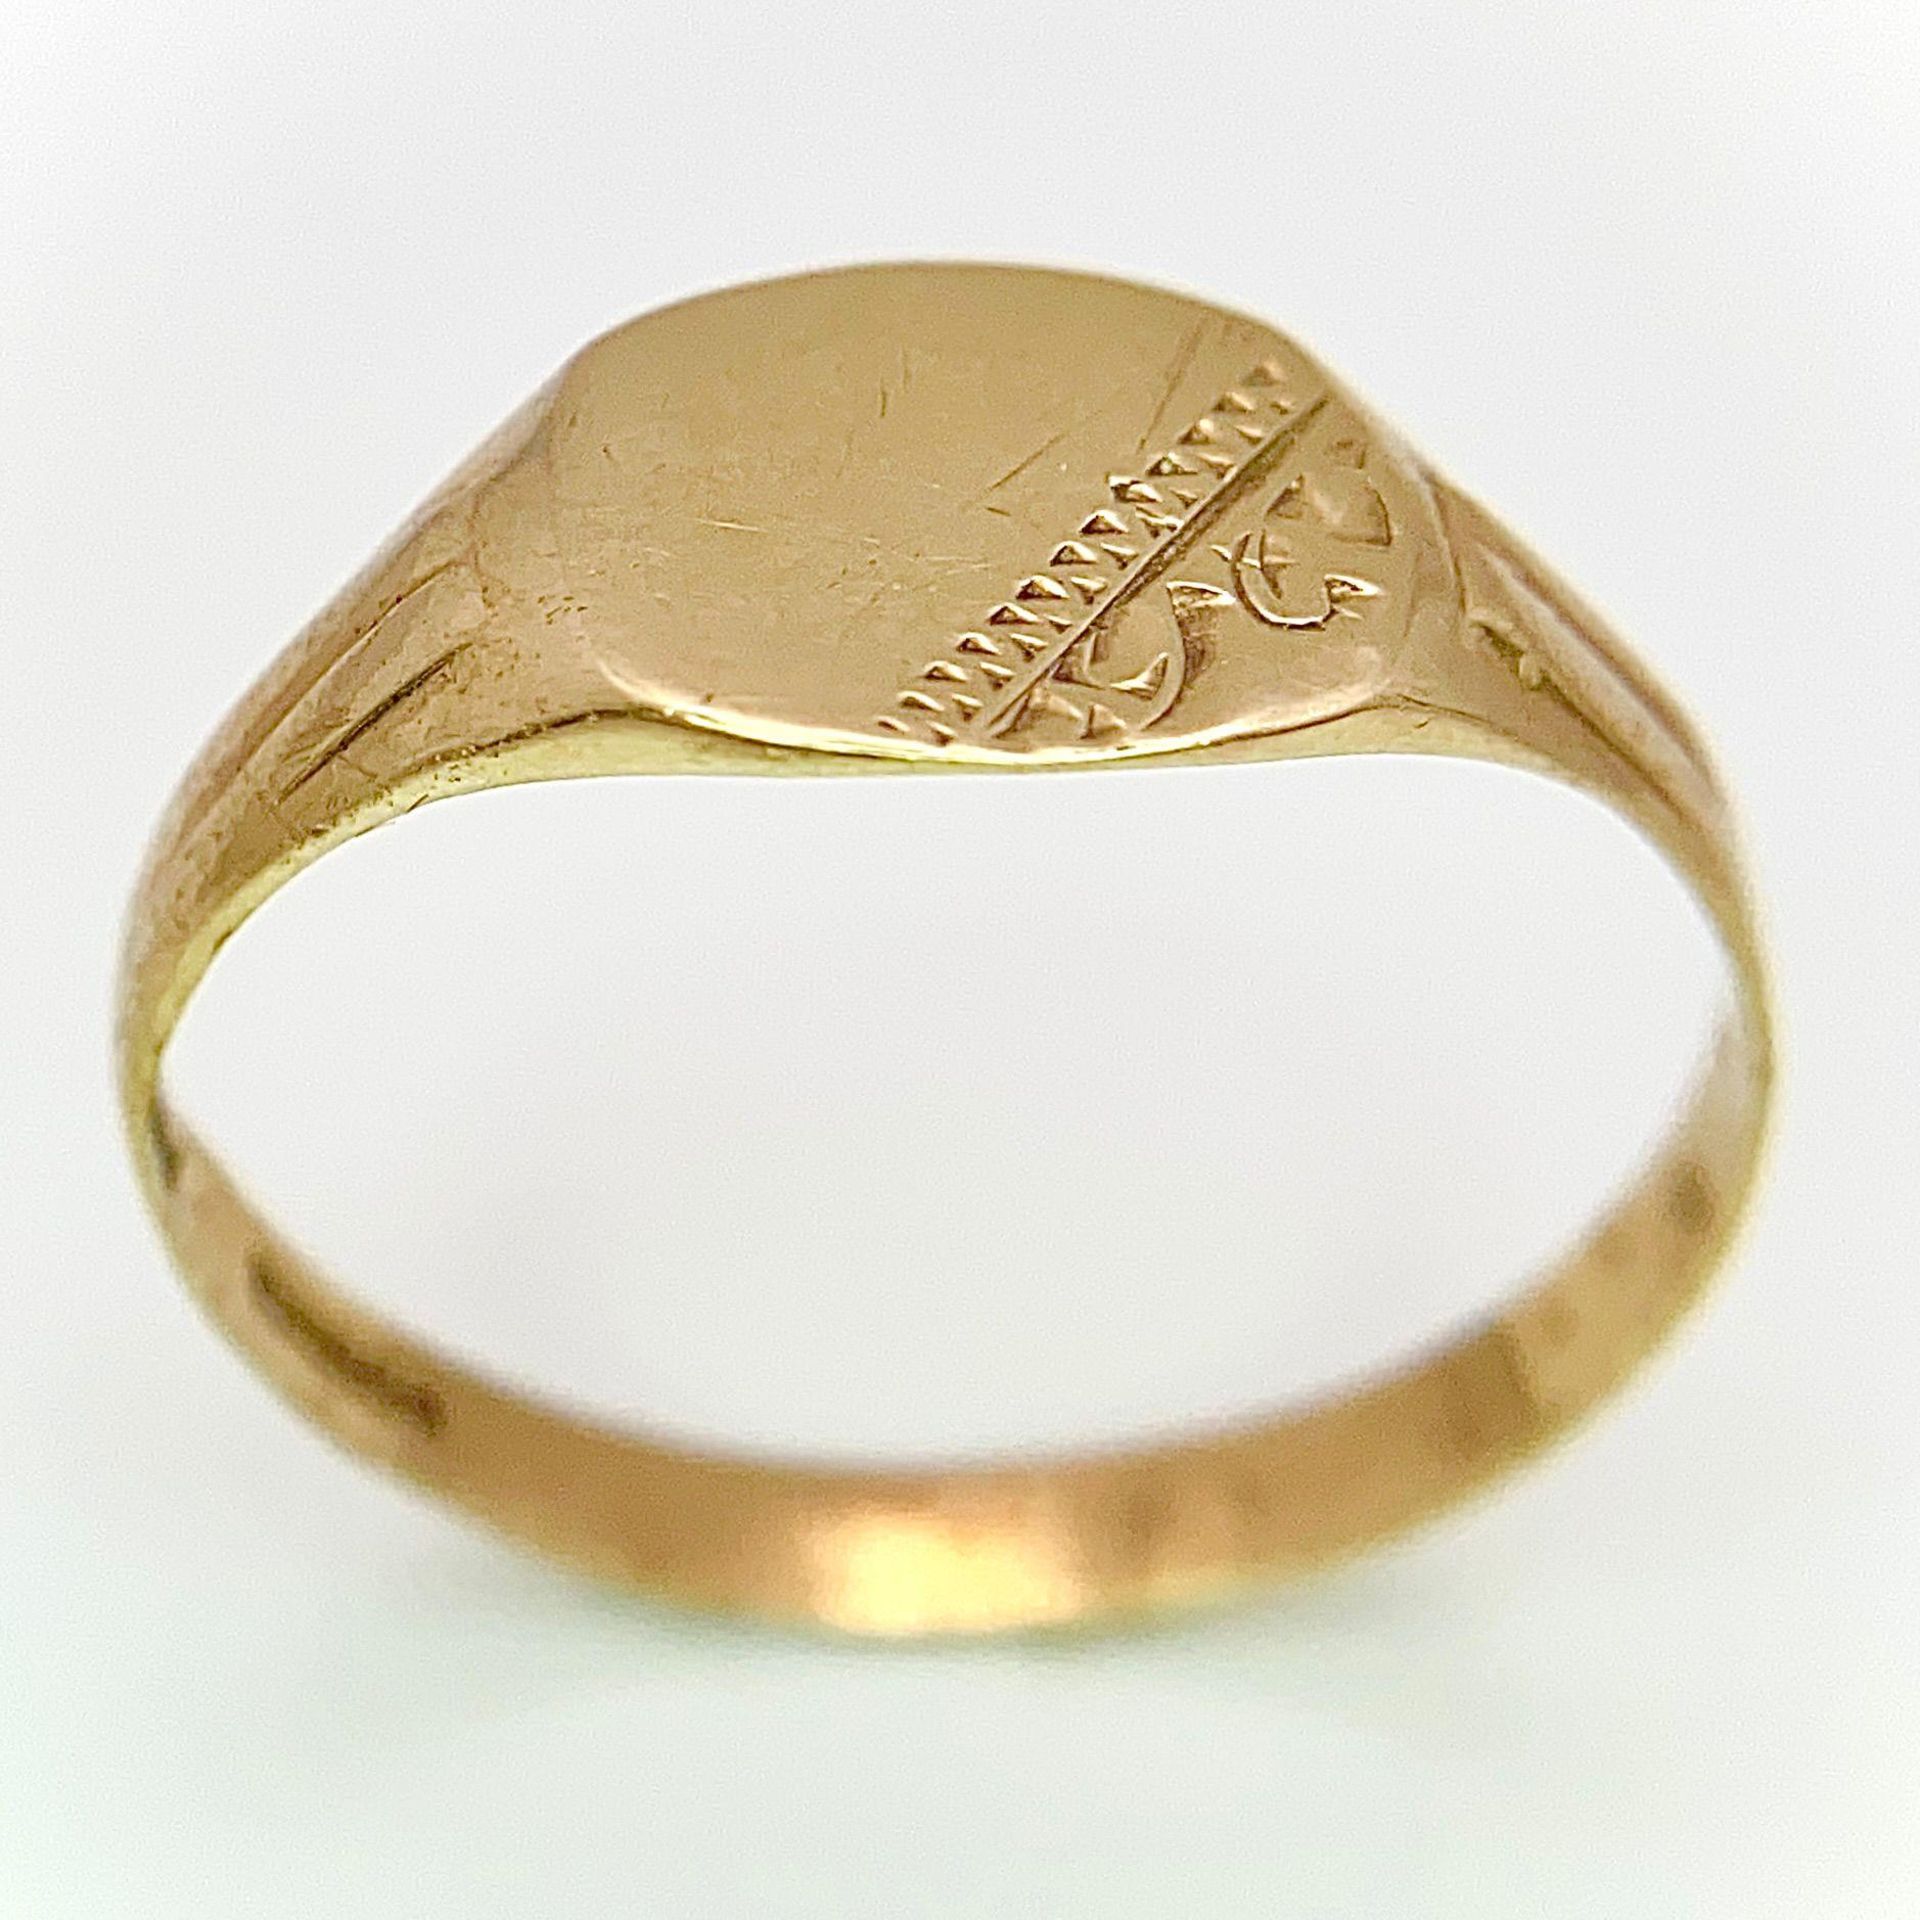 A Vintage 9K Yellow Gold Signet Ring. Size L. 1.3g weight. - Image 3 of 7